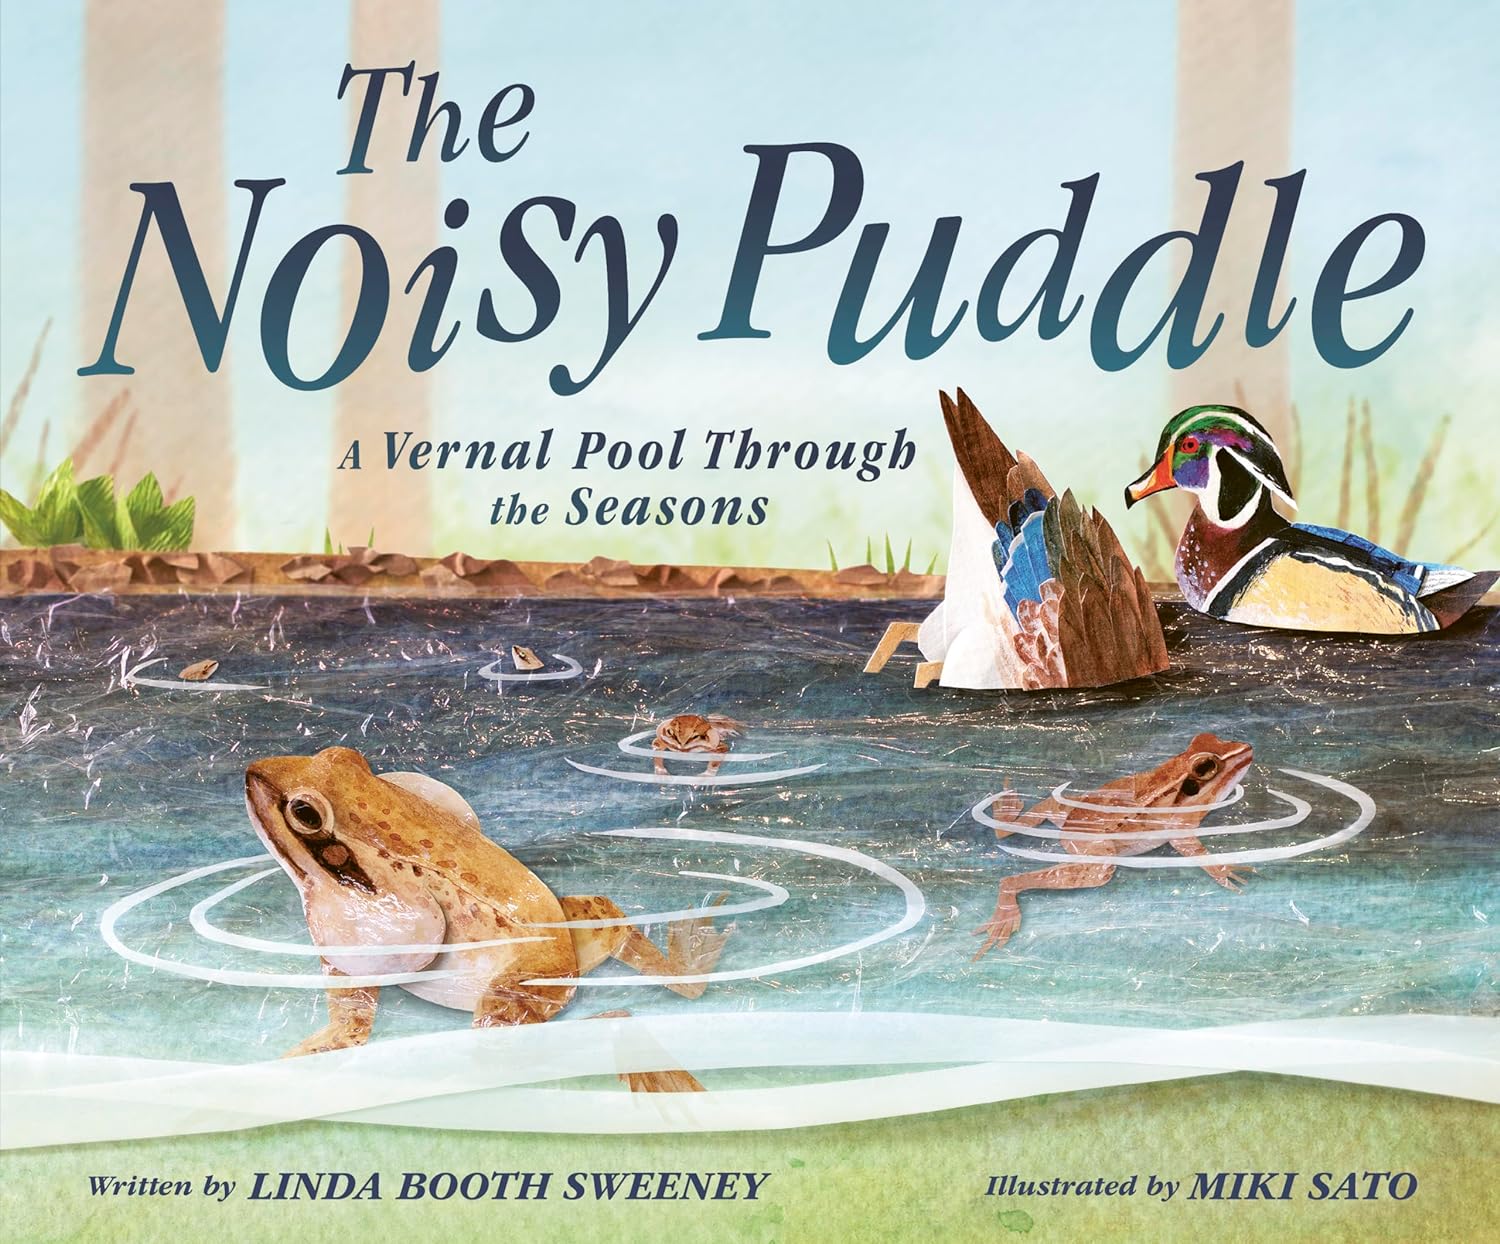 Image for "The Noisy Puddle"